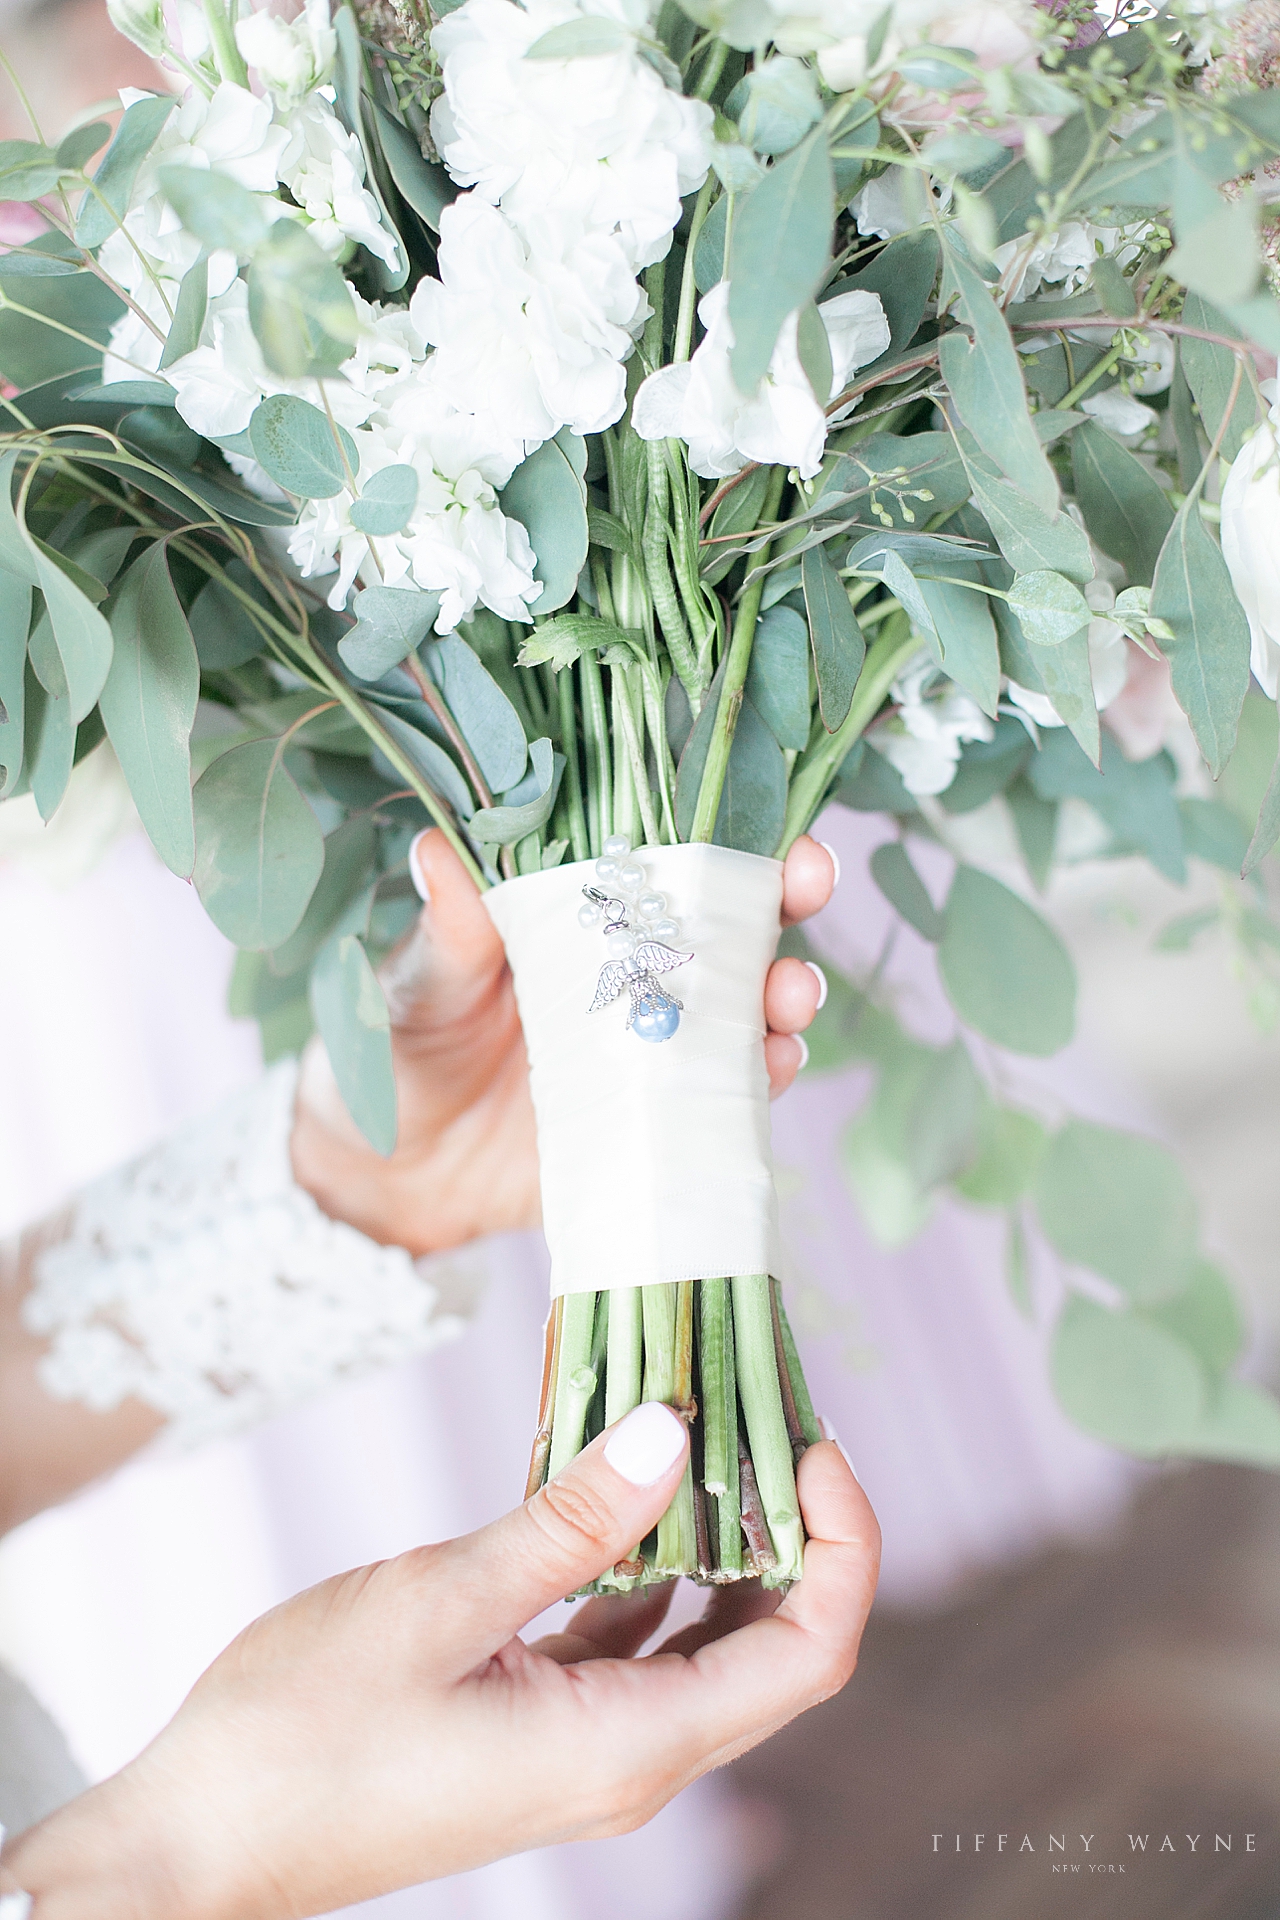 bride's bouquet details photographed by wedding photographer Tiffany Wayne Photography